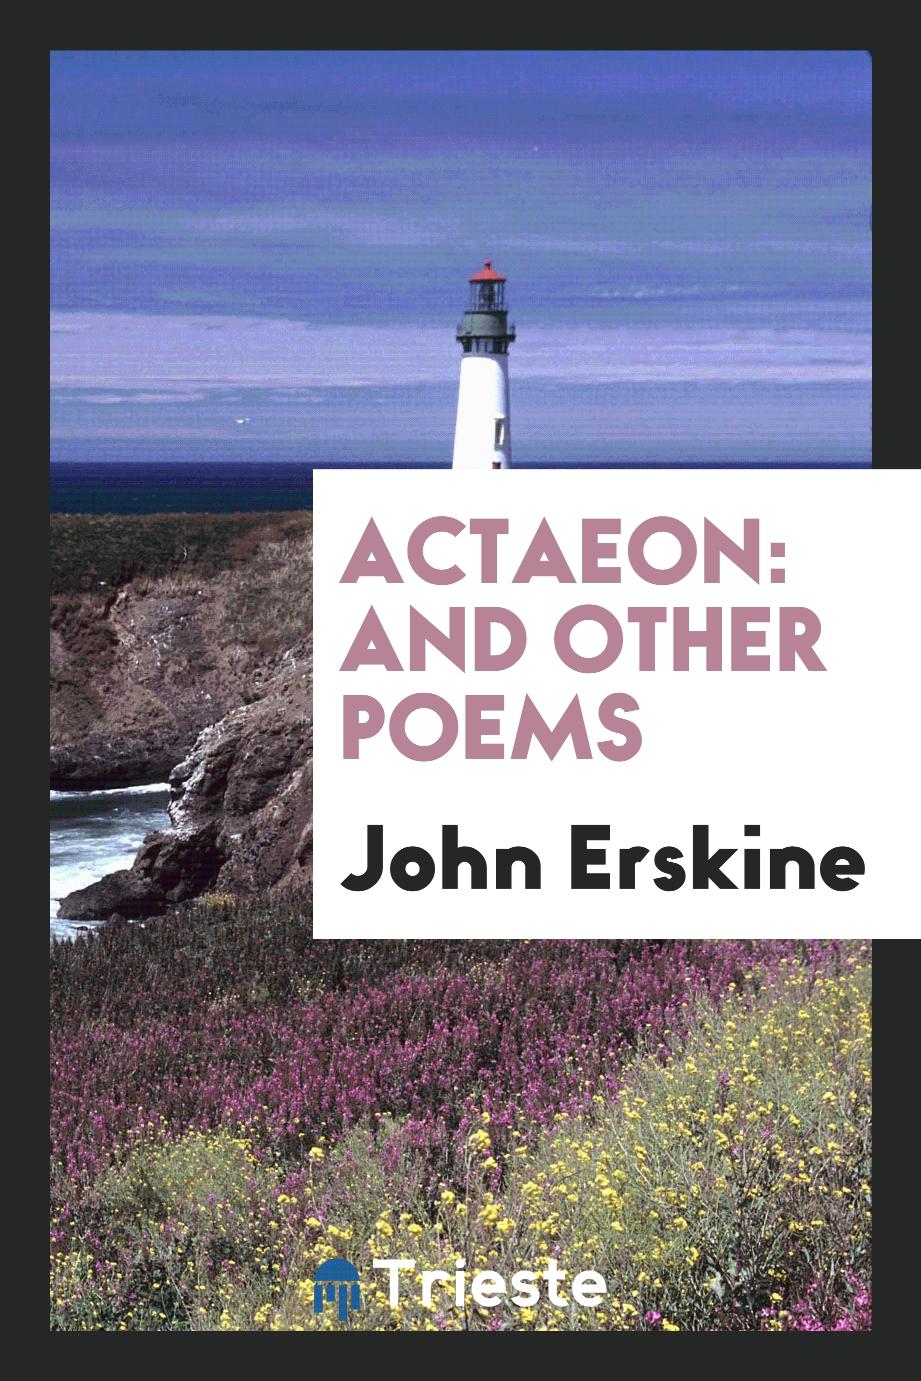 Actaeon: And Other Poems